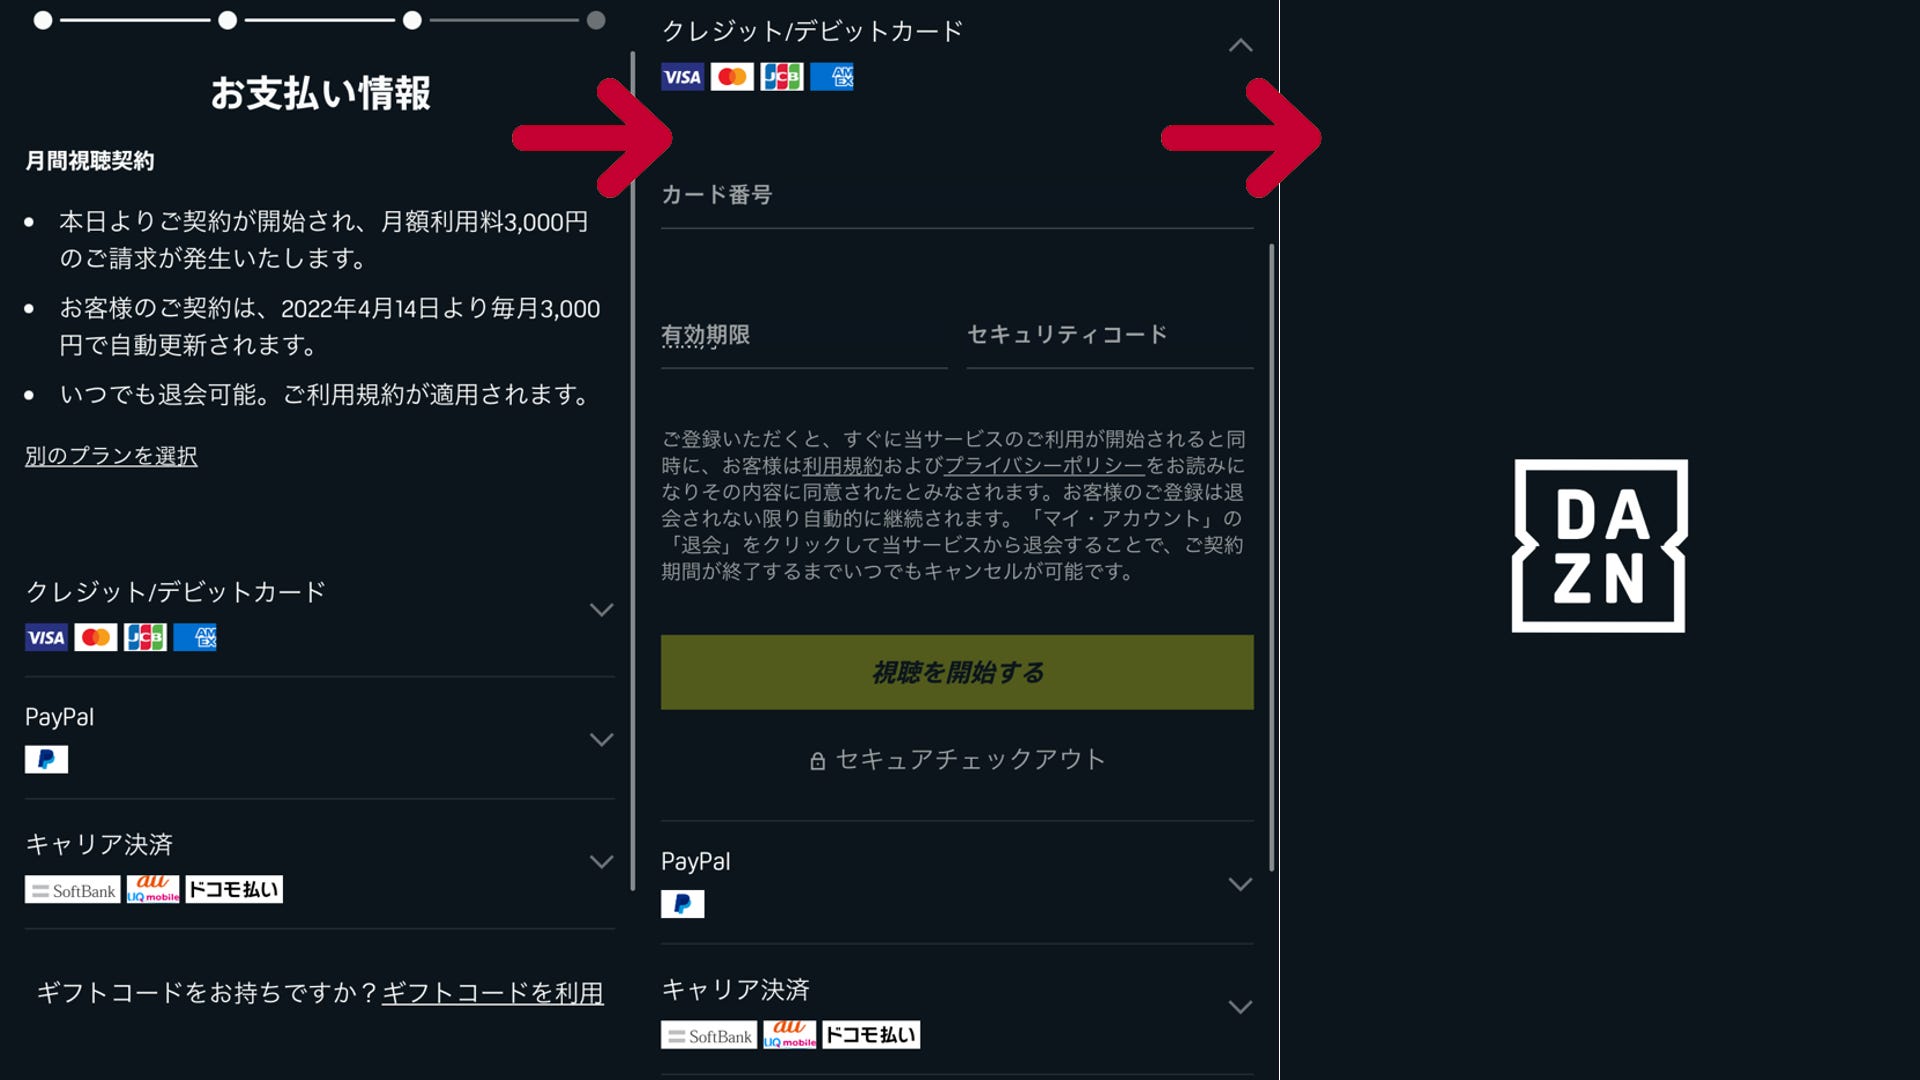 dazn-join-how-to-02